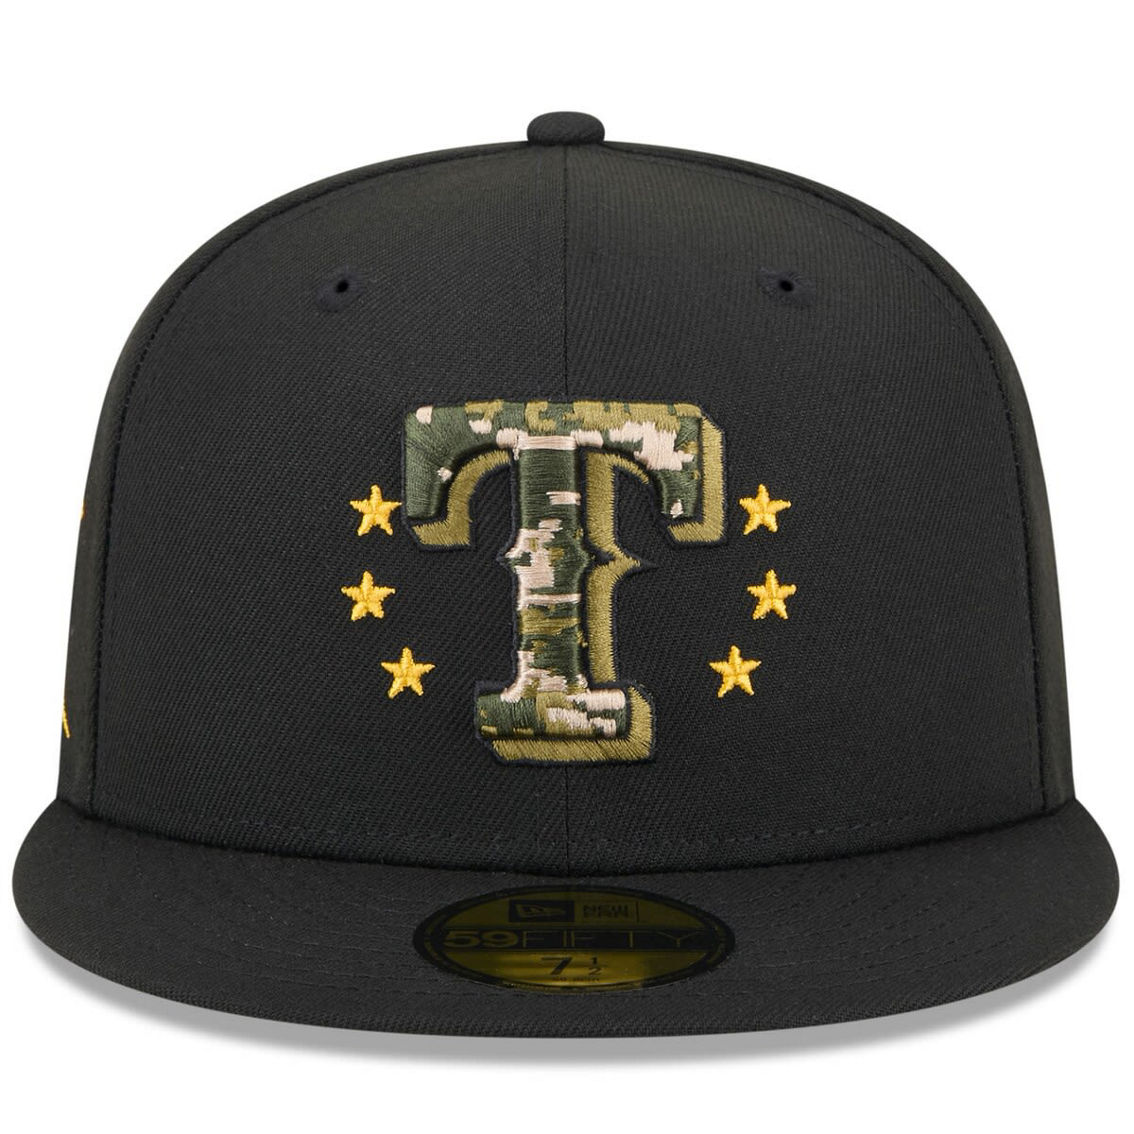 New Era Black Texas Rangers 2024 Armed Forces Day 59FIFTY Fitted Hat - Image 3 of 4